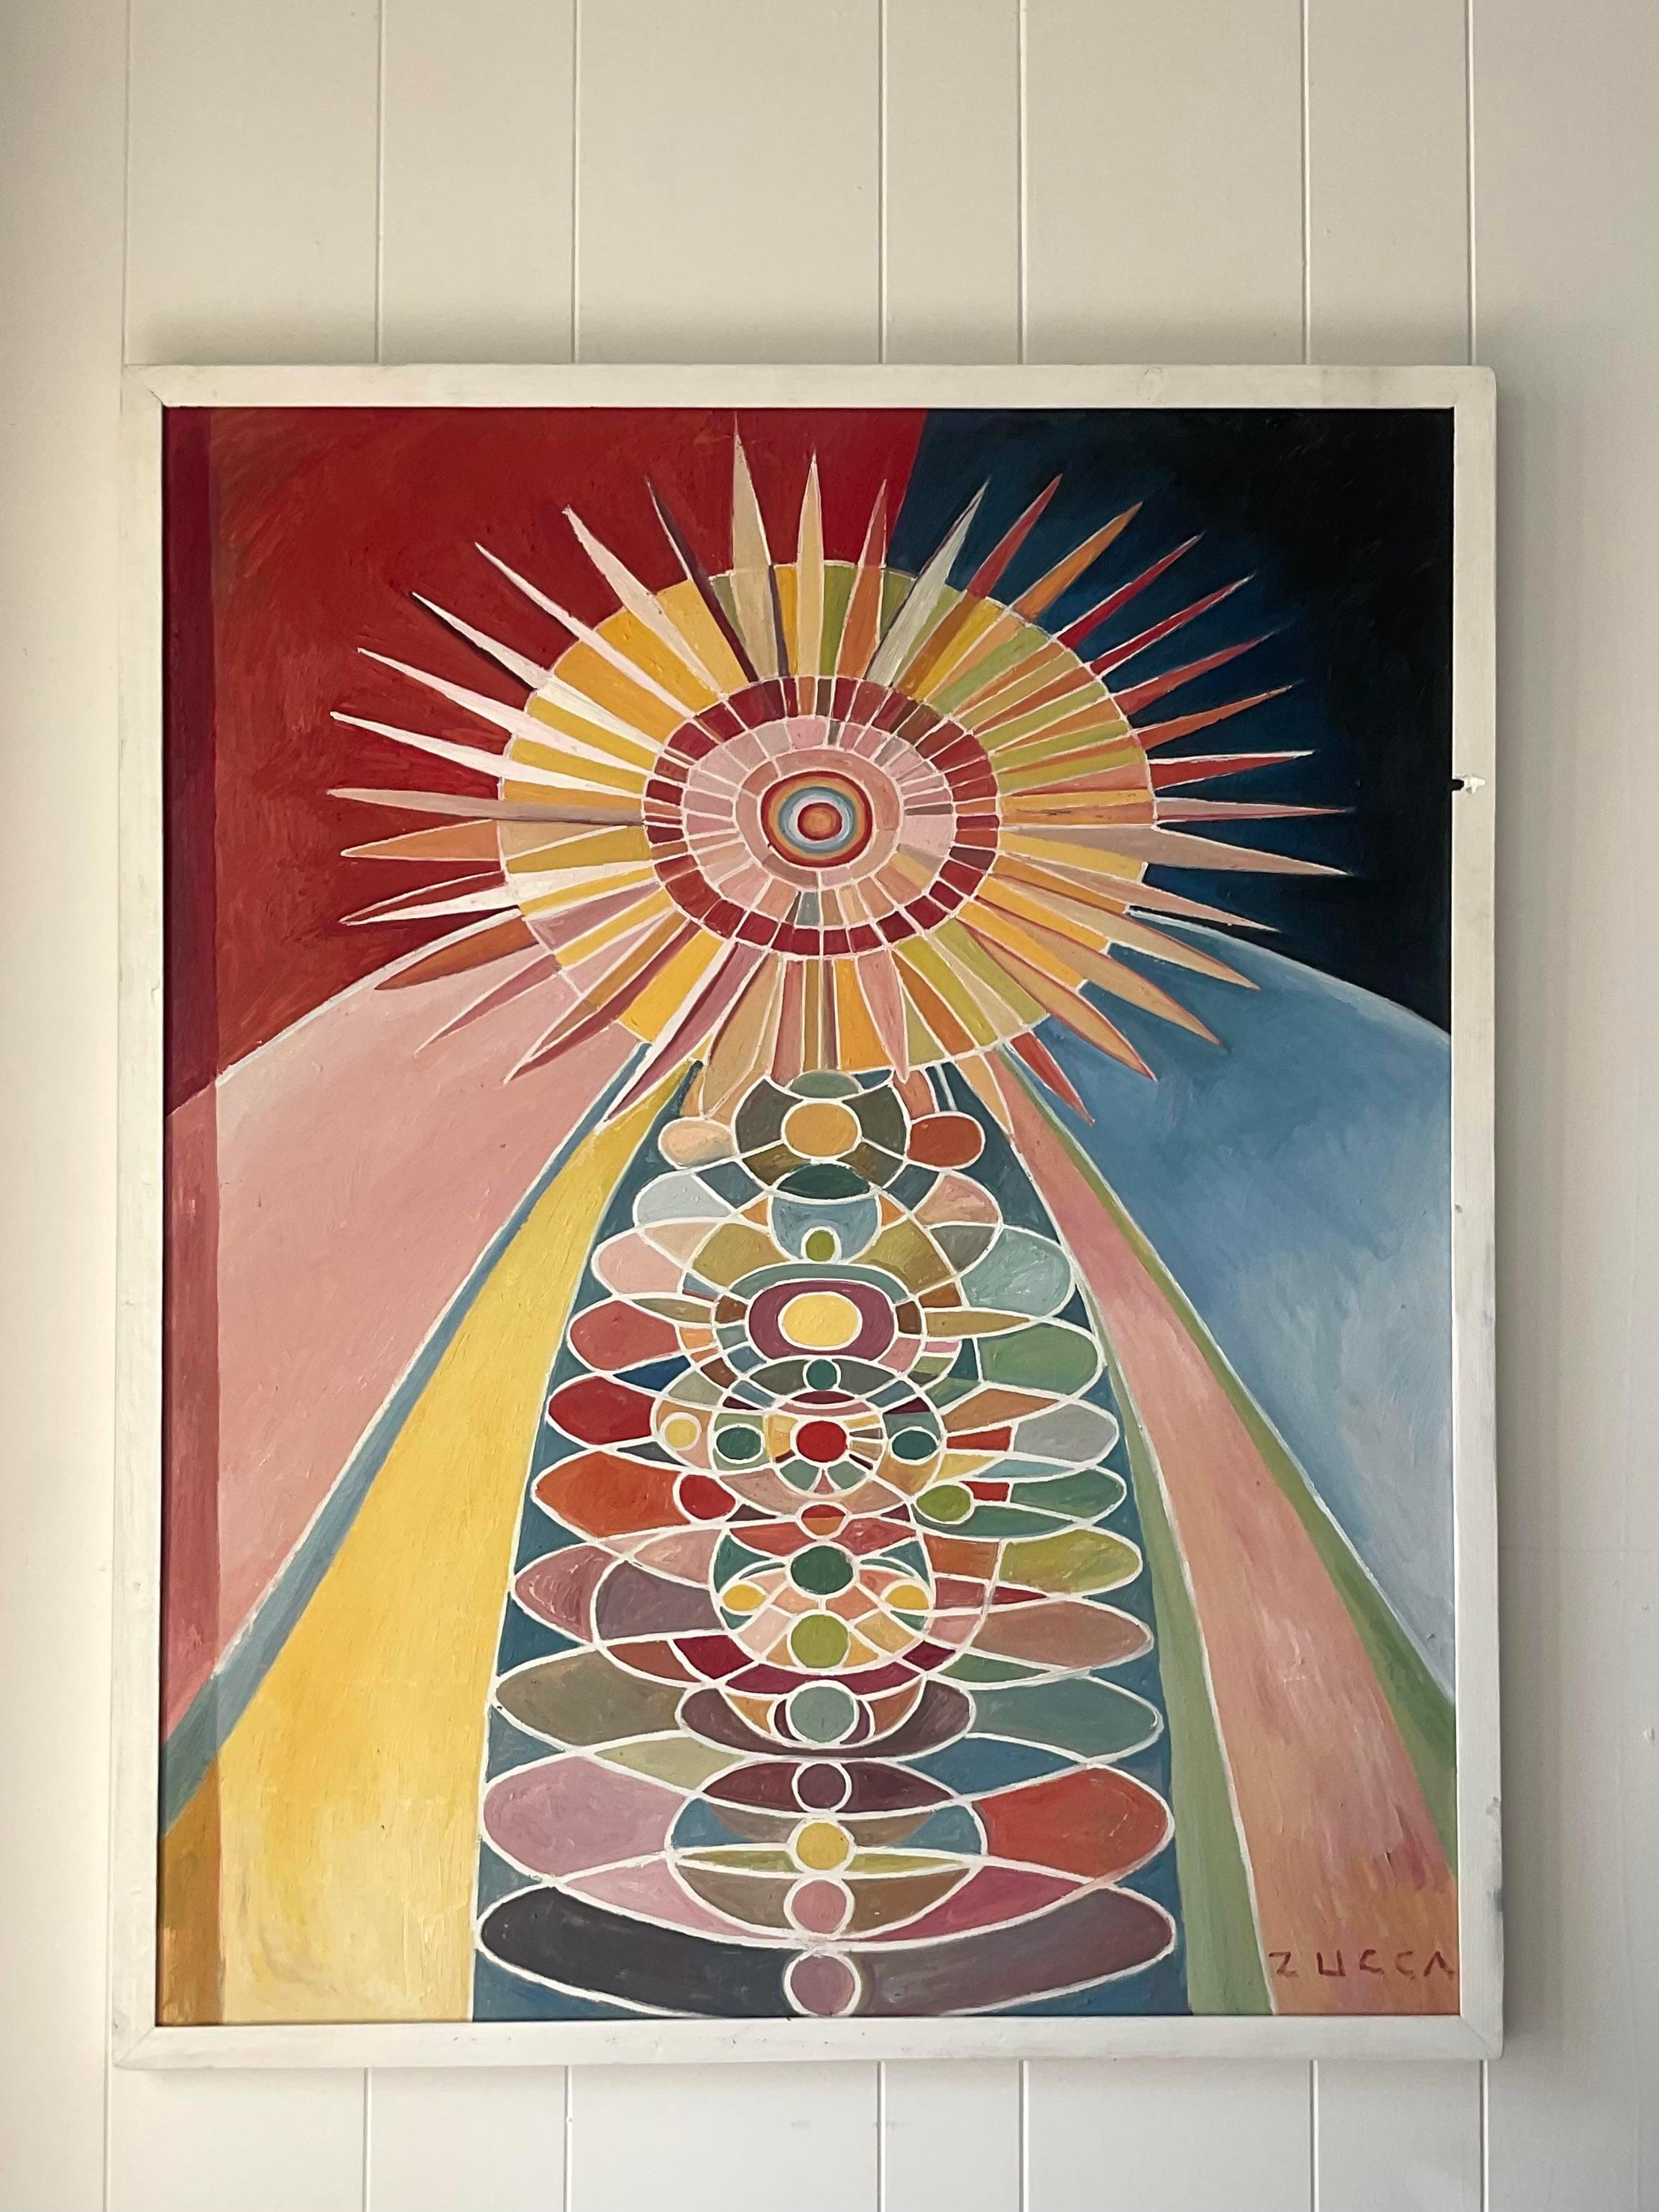 A striking vintage Boho original oil painting on board. A chic monumental Abstract expressionist composition in bright, clear colors. Signed by the artist. Acquired from a Palm Beach estate.